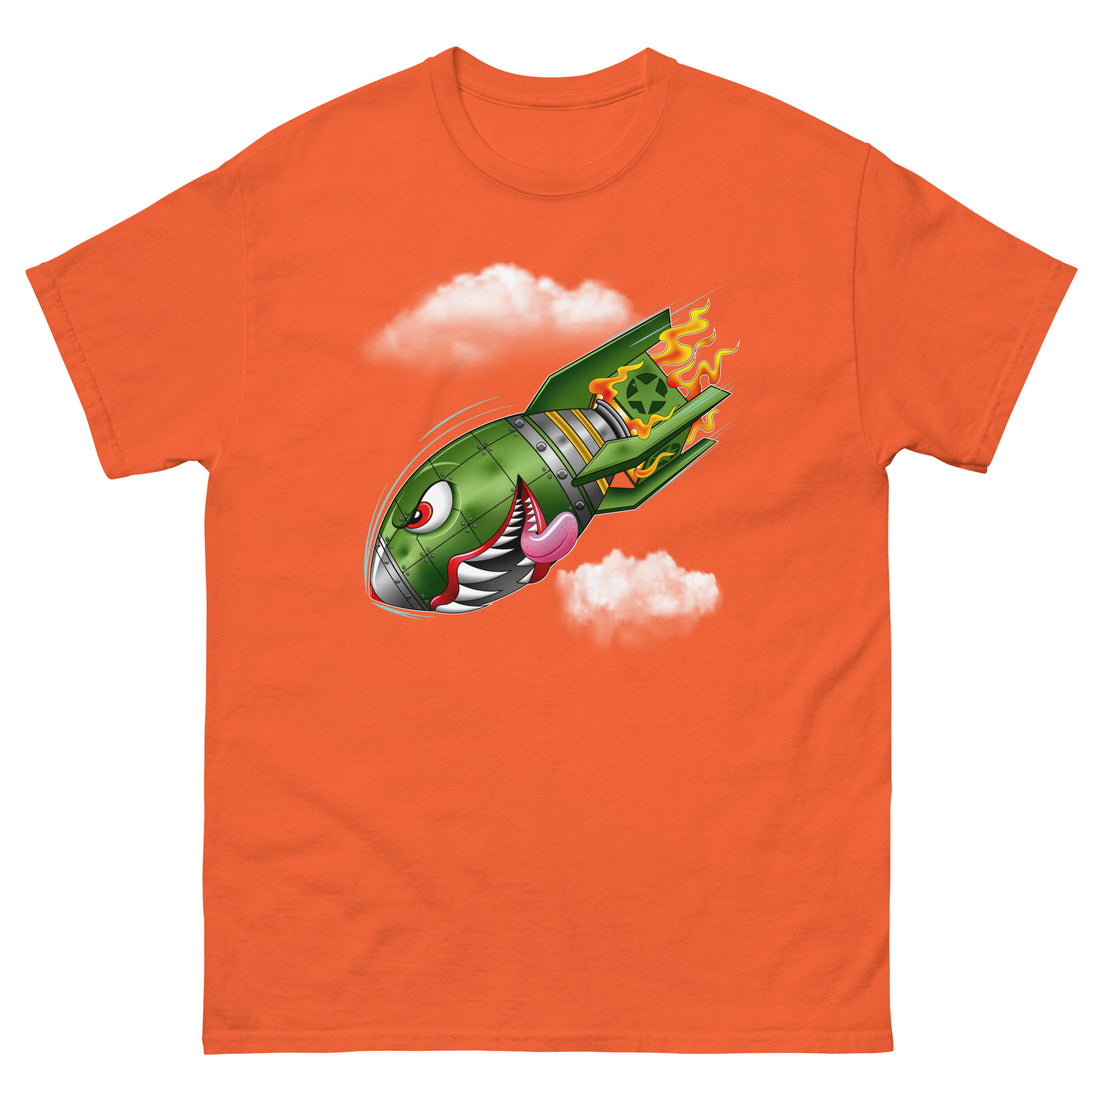 An orange t-shirt with a military green neo-traditional bomb tattoo design. The bomb is falling with a look of determination in its eyes, an evil toothy grin, and its tongue hanging out of its mouth. Flames are coming from the back of the bomb, and some clouds are in the background.